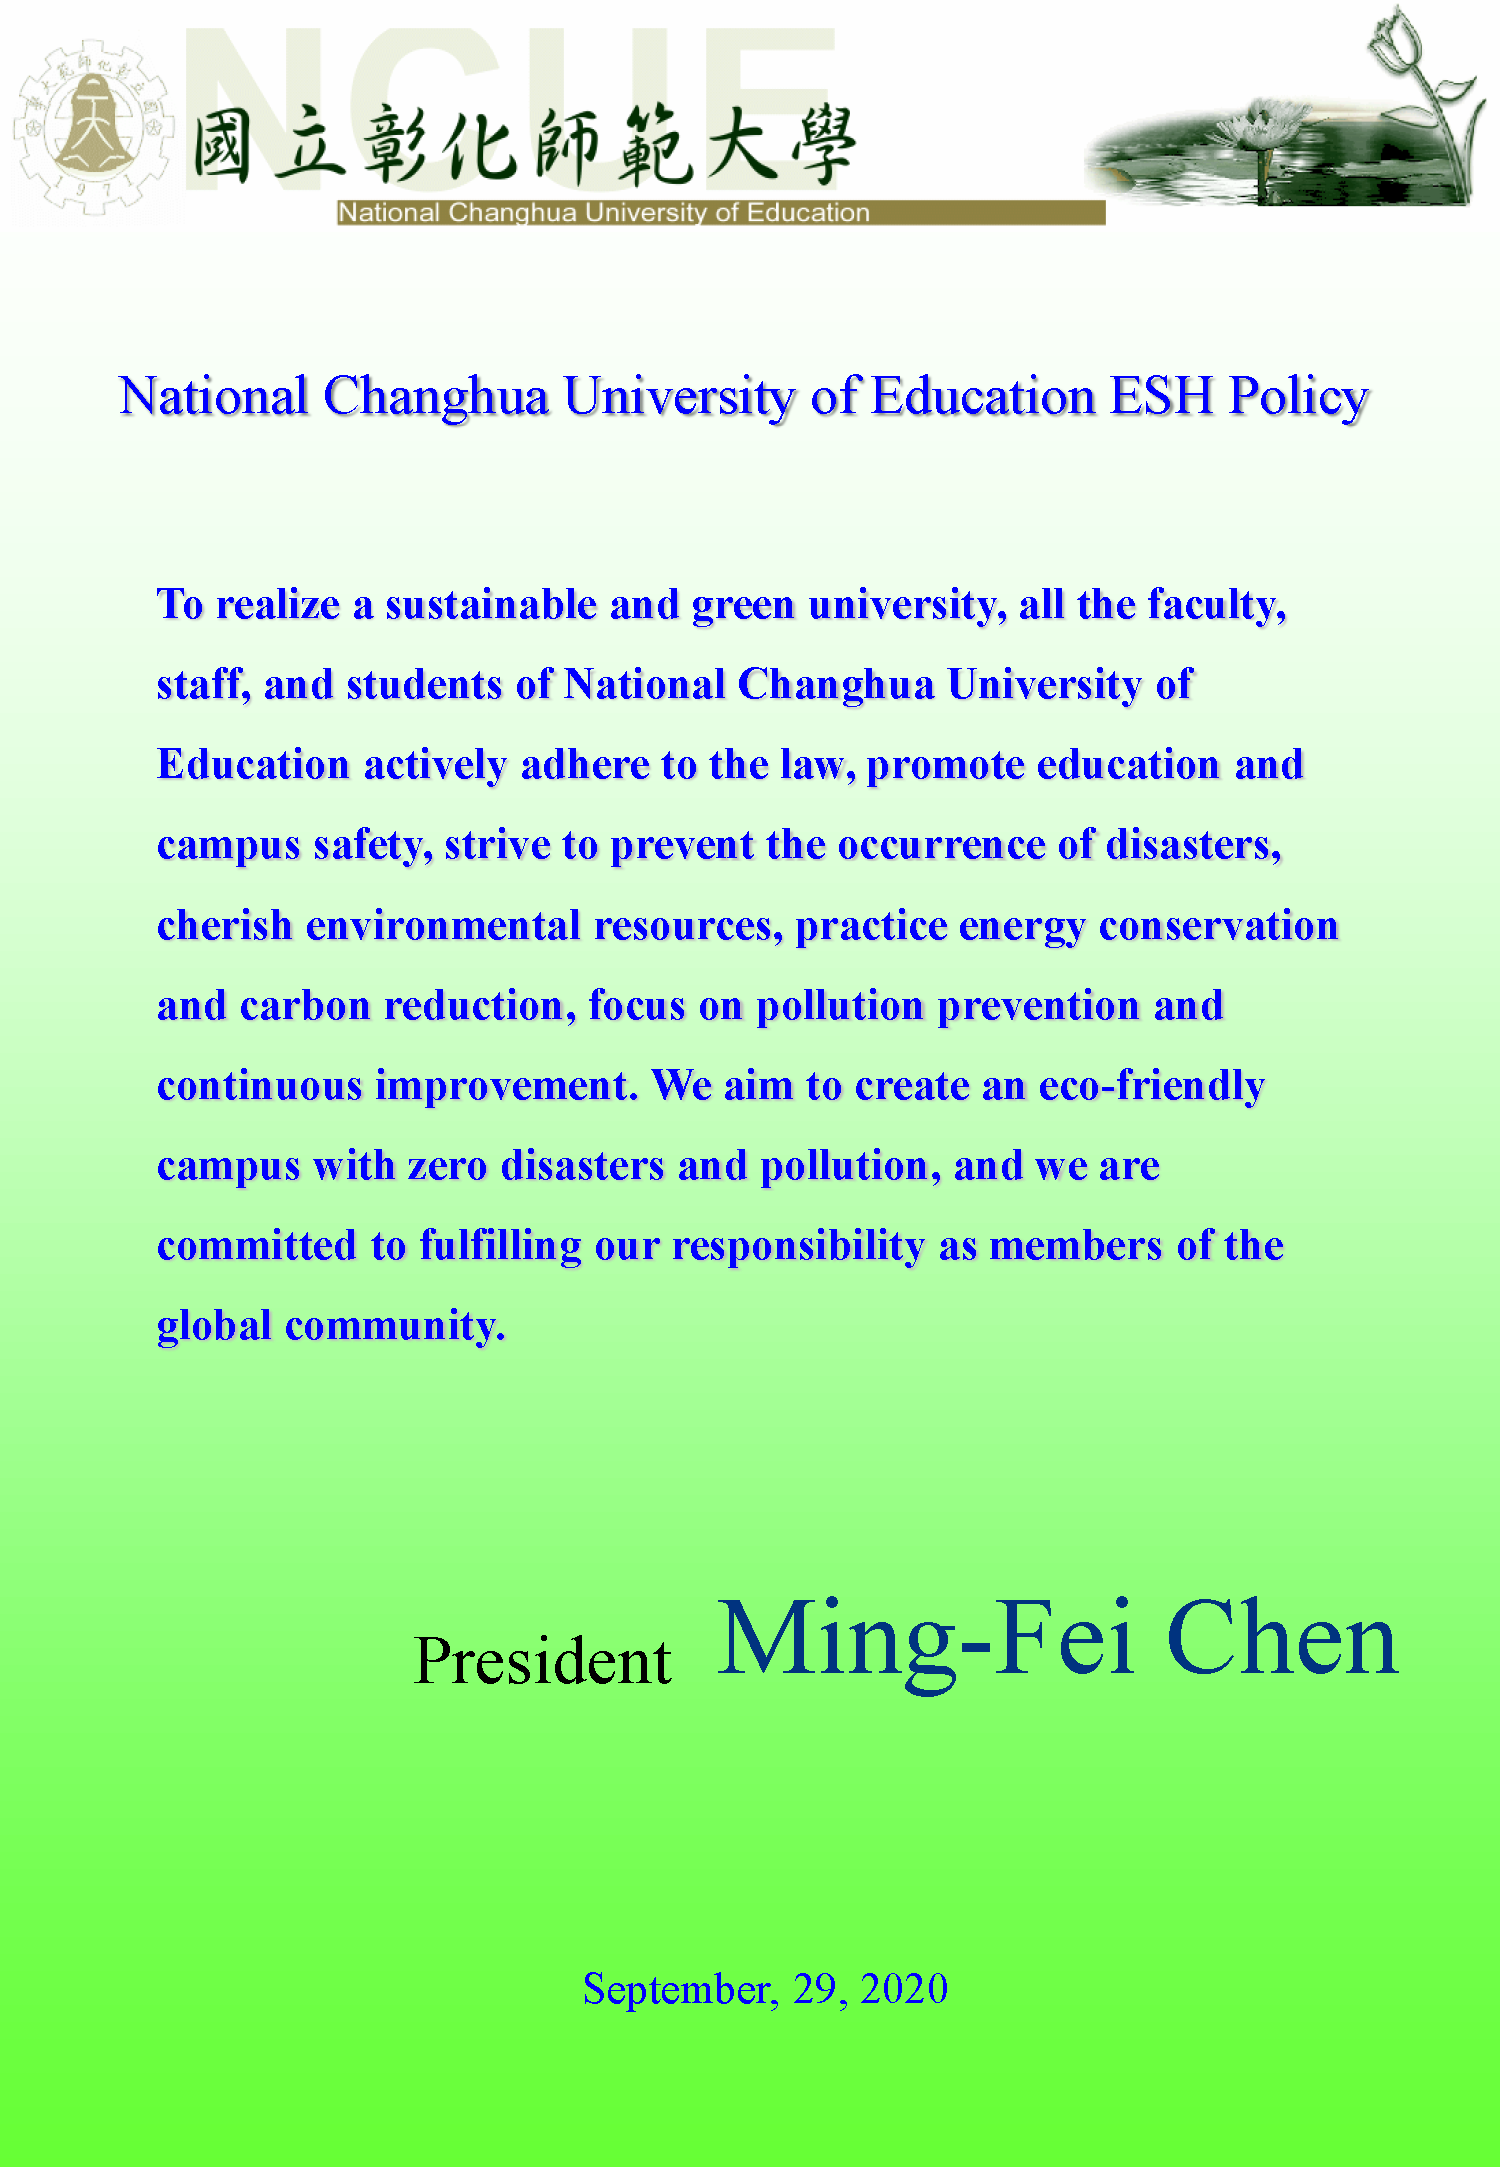 Figure 2. Protection and Occupational Safety and Health Policy of National Changhua University of Education